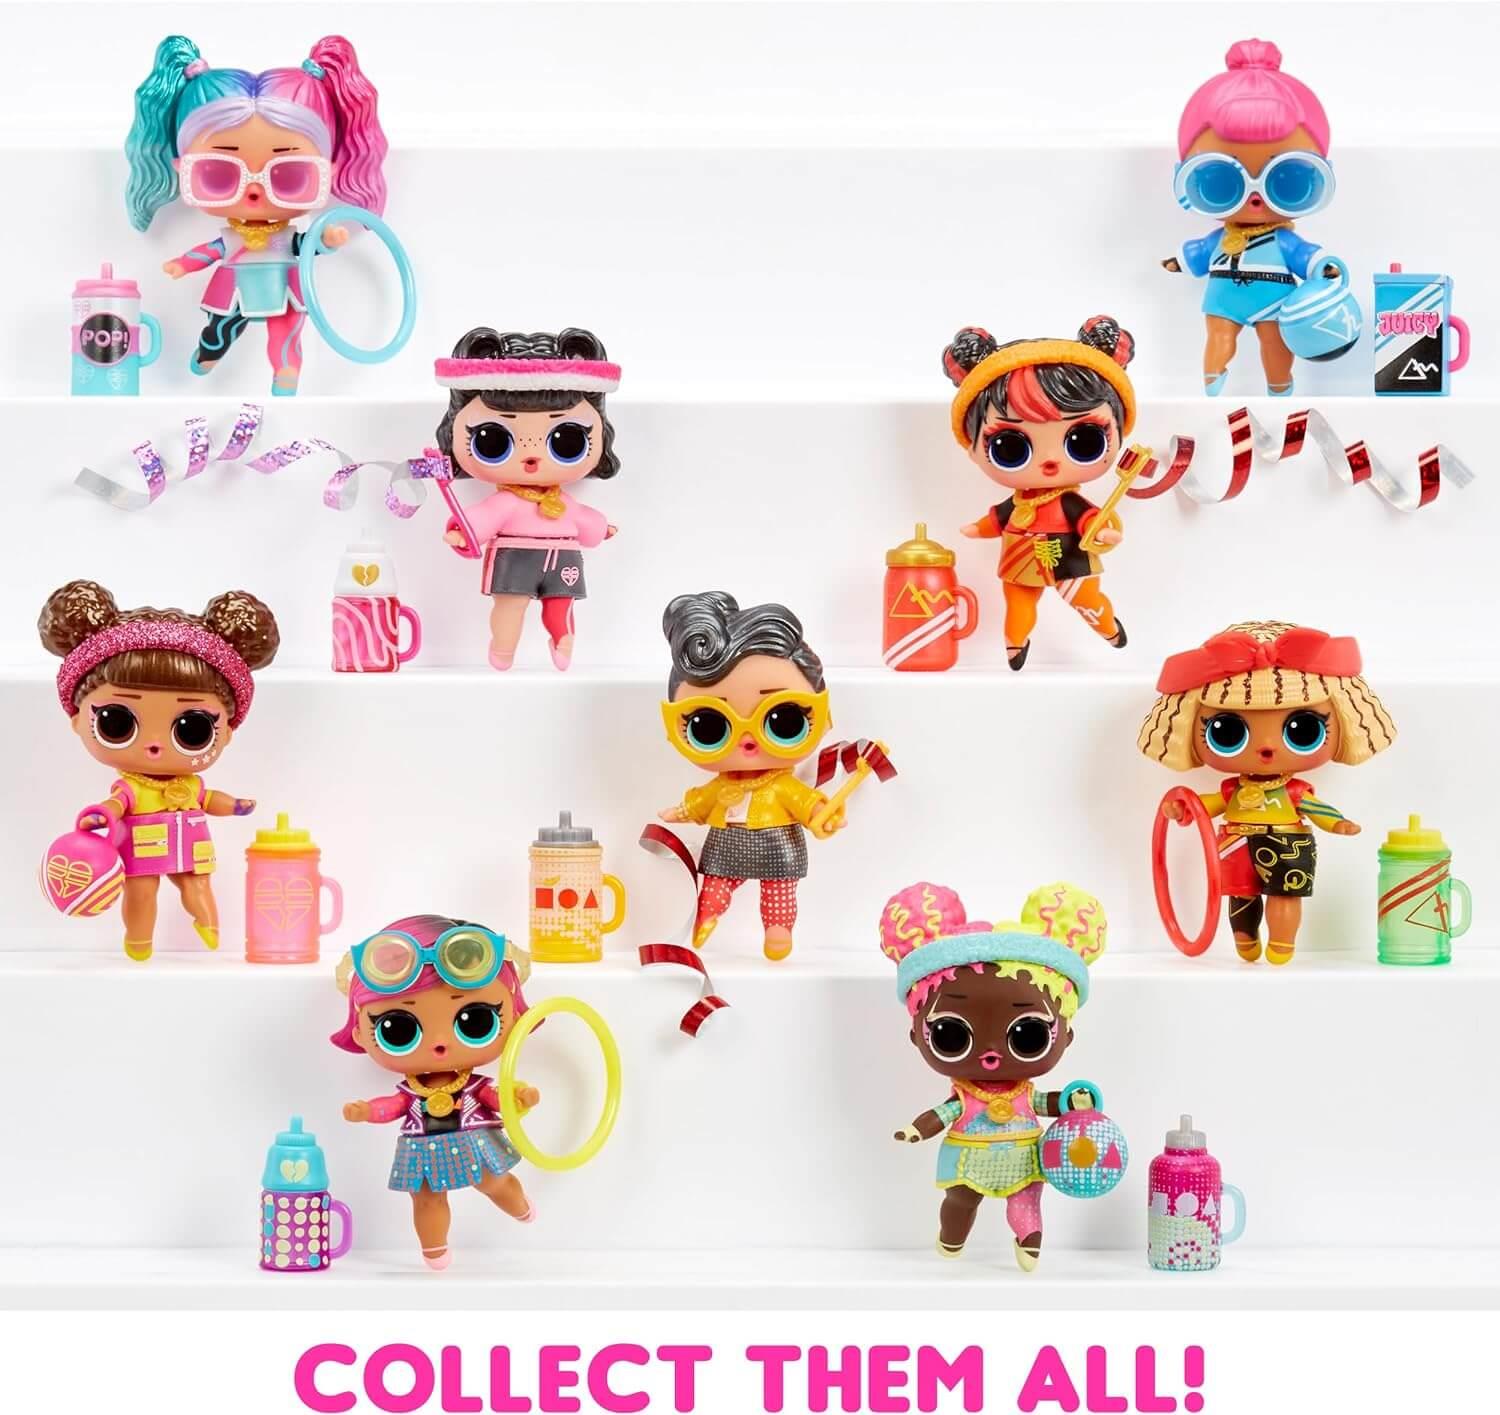 LOL Surprise All Star Sports Gymnastics Doll with 8 Surprises